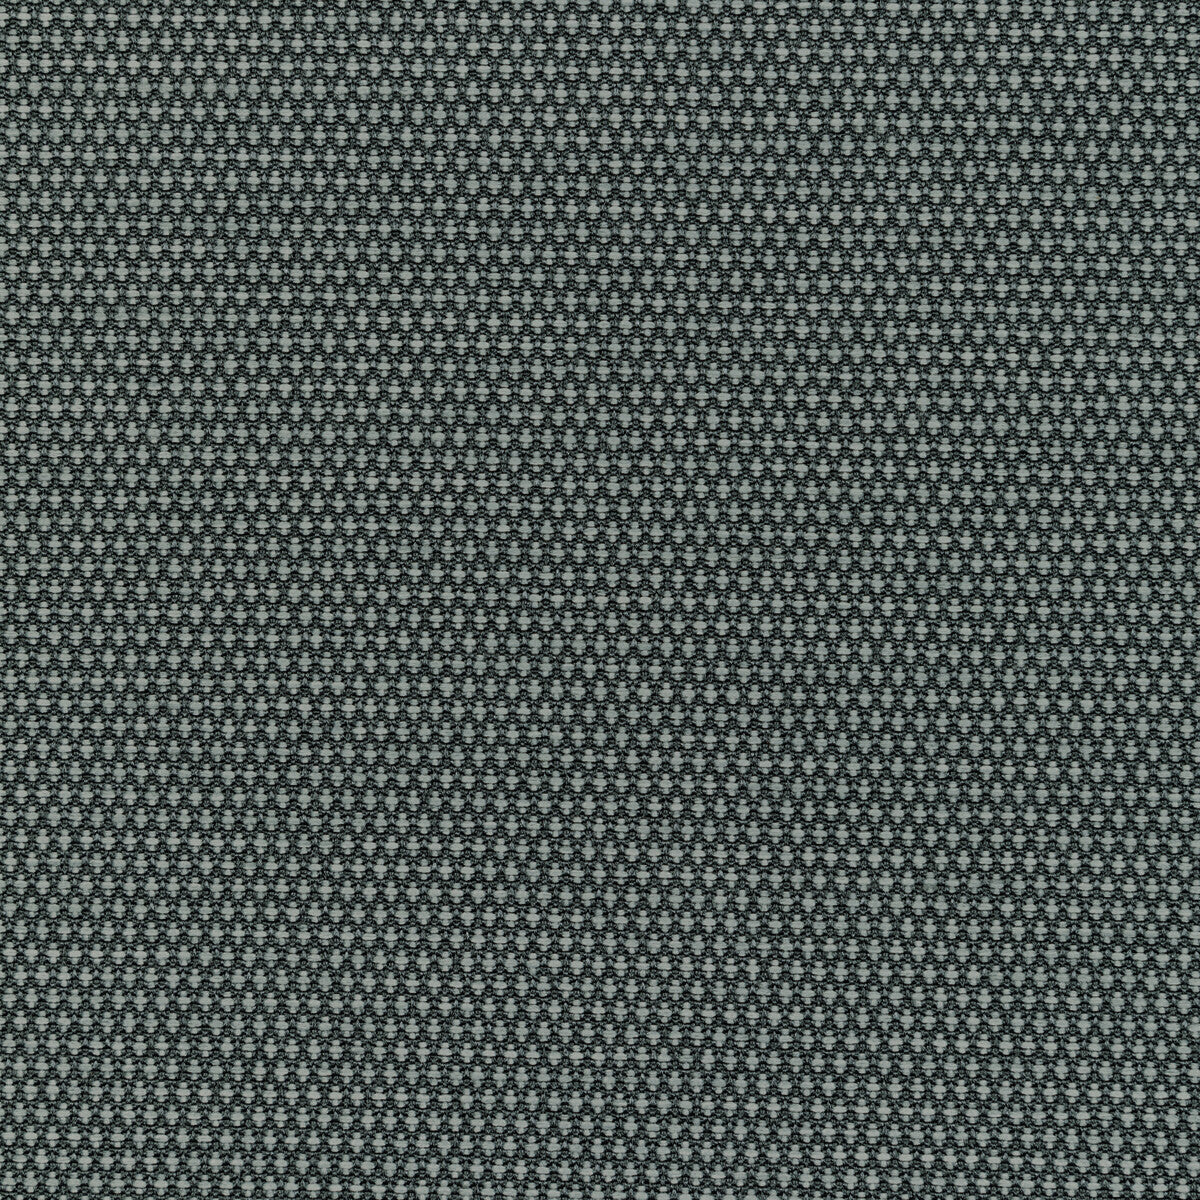 Mobilize fabric in granite color - pattern 36256.21.0 - by Kravet Contract in the Supreen collection